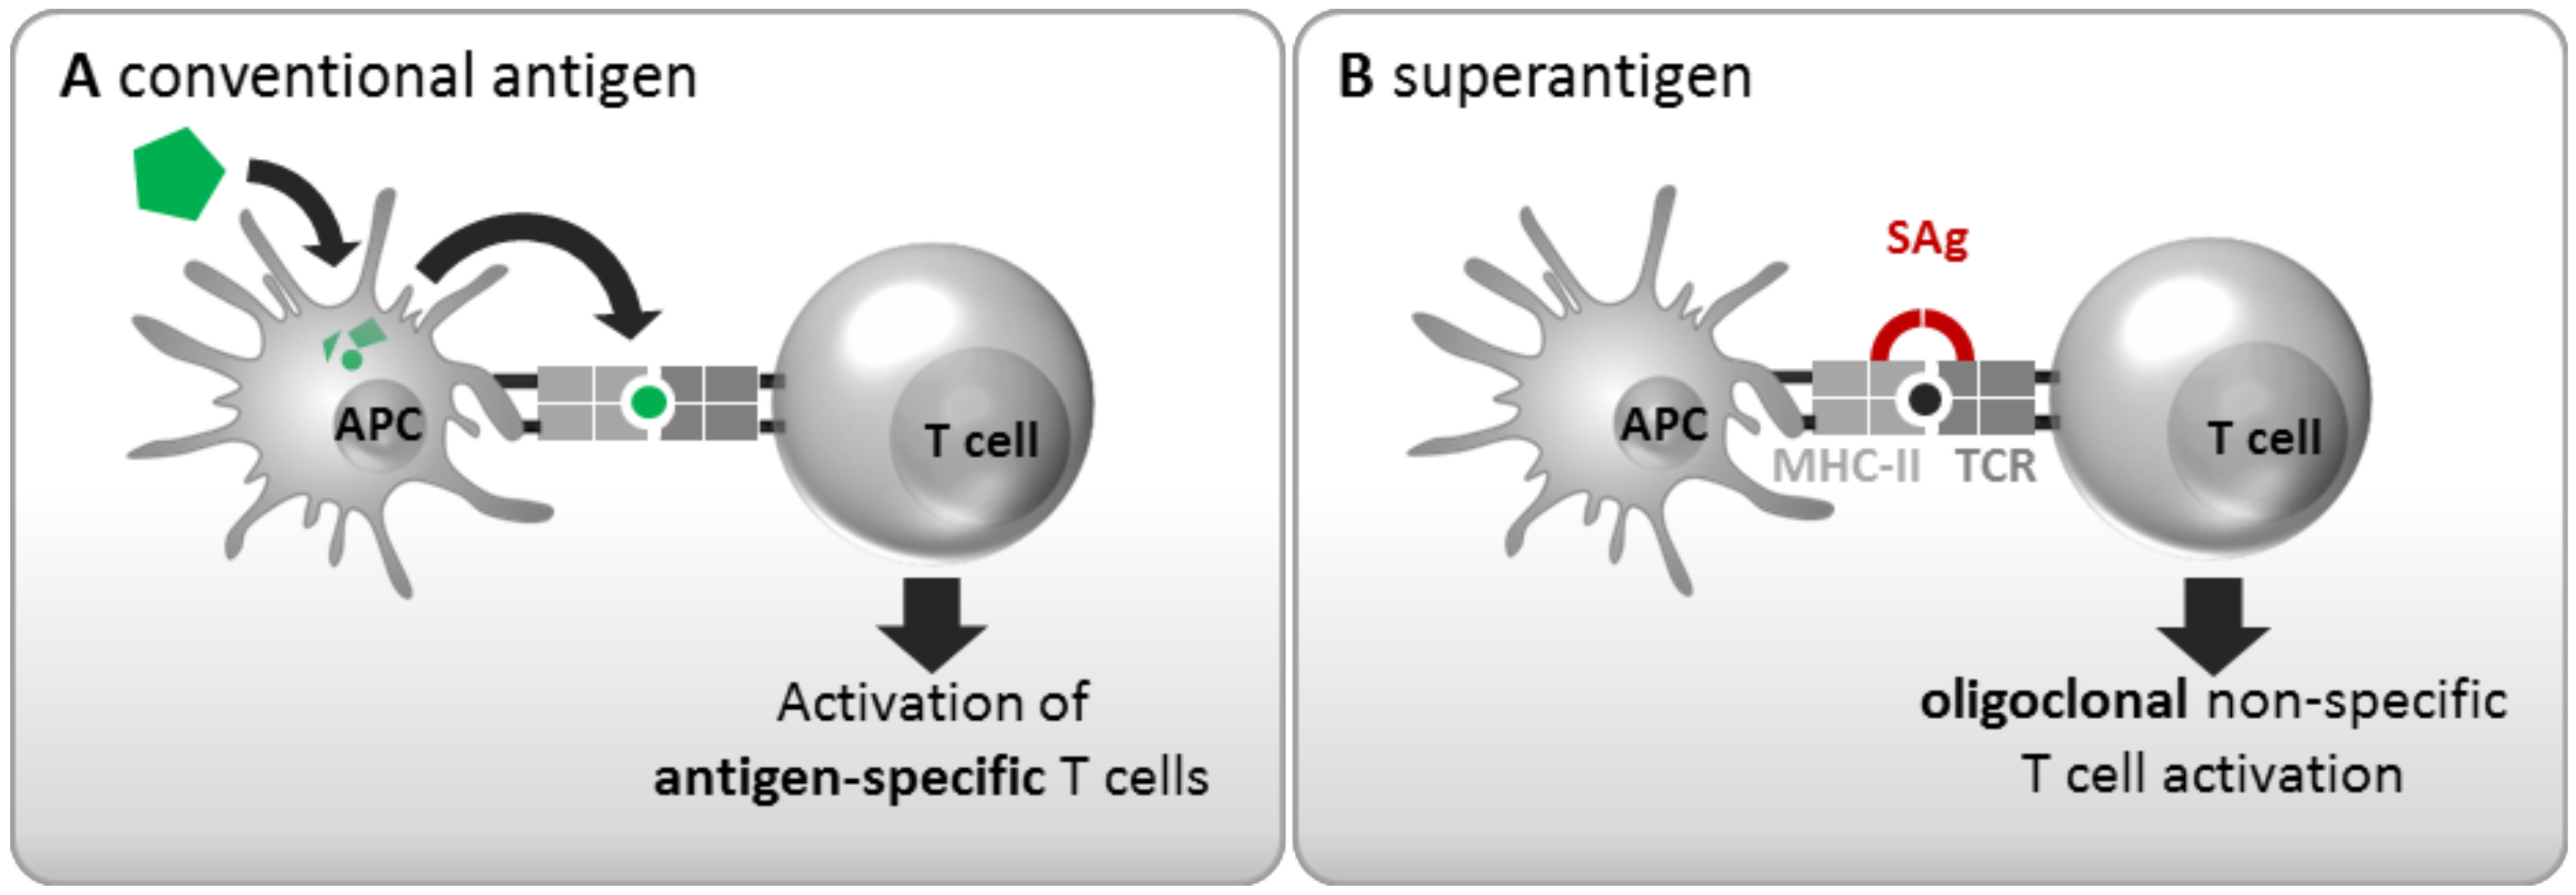 Frontiers - Superantigen Recognition and Interactions: Functions,  Mechanisms and Applications - Immunology